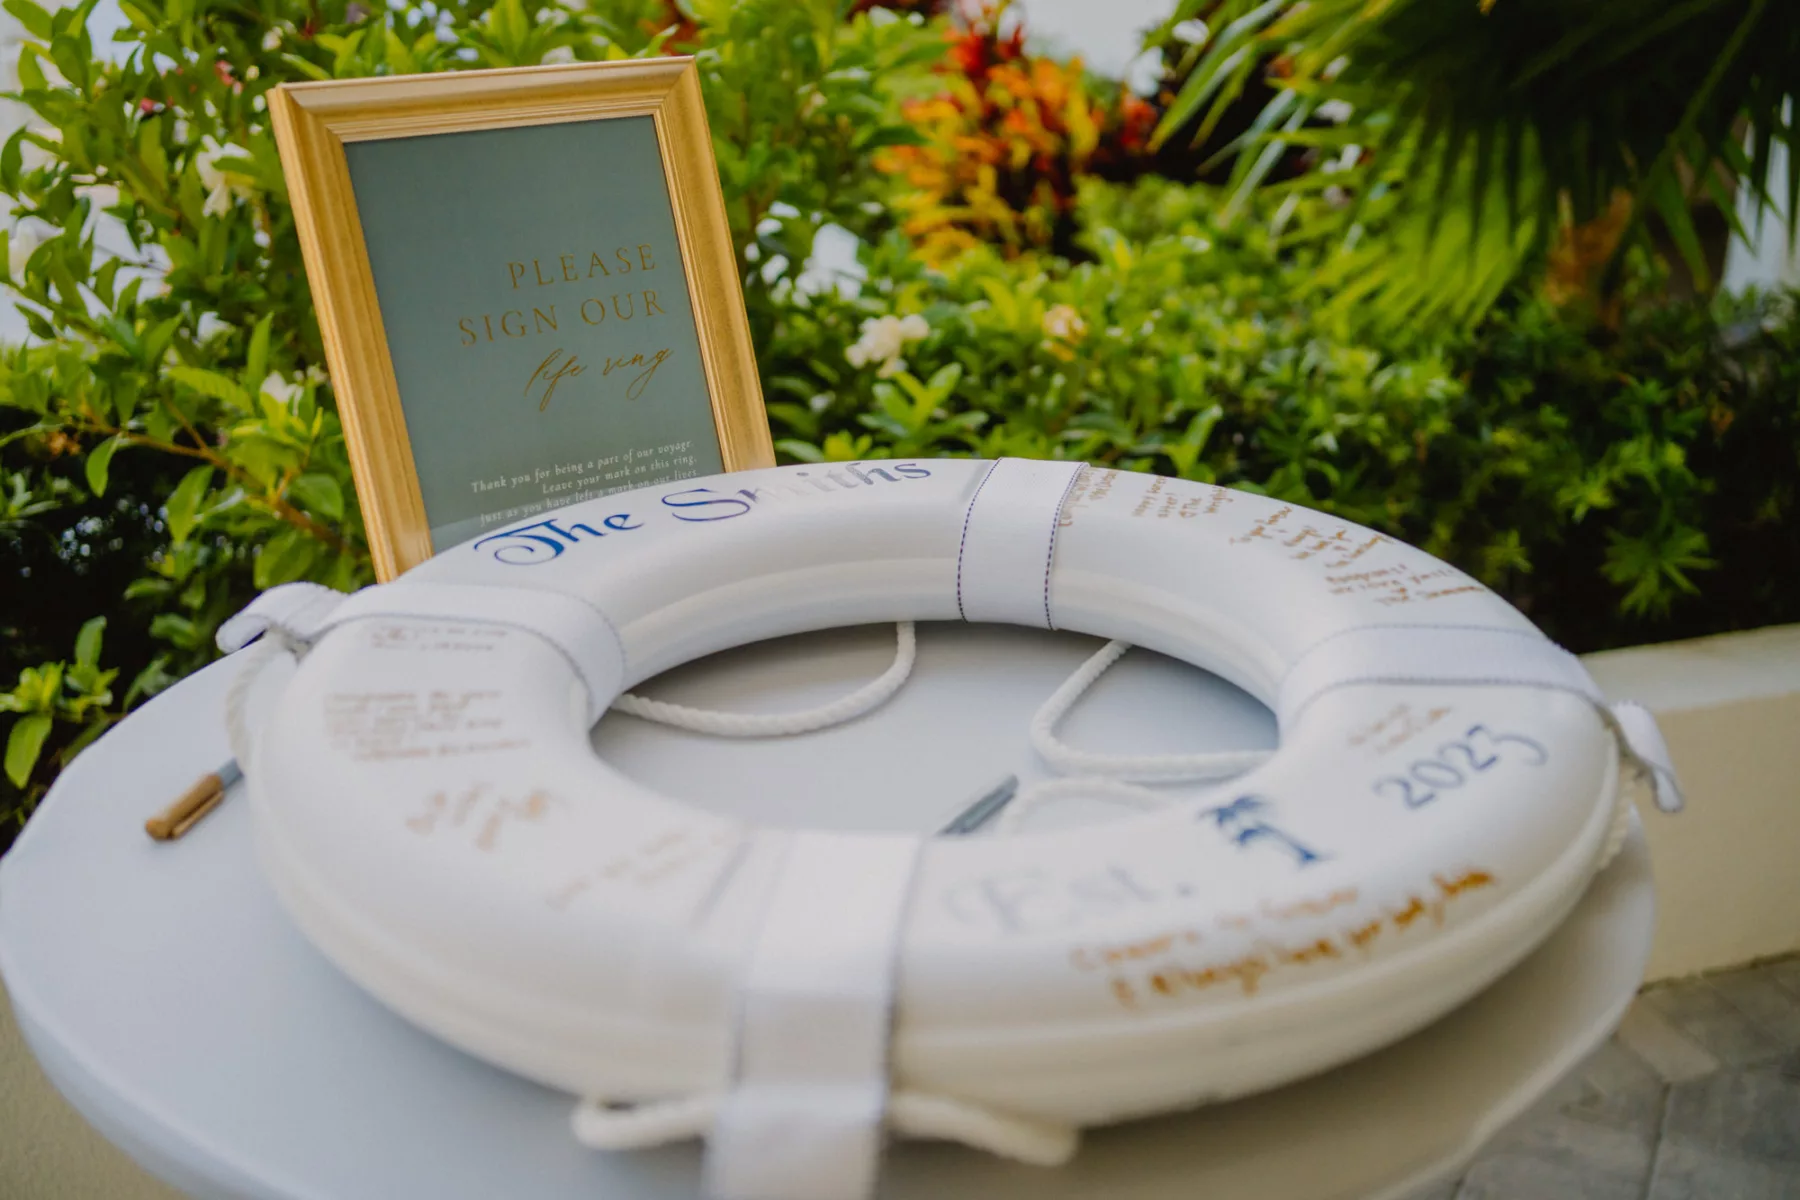 Life Ring Buoy Guest Book Inspiration for Tropical Beach Wedding